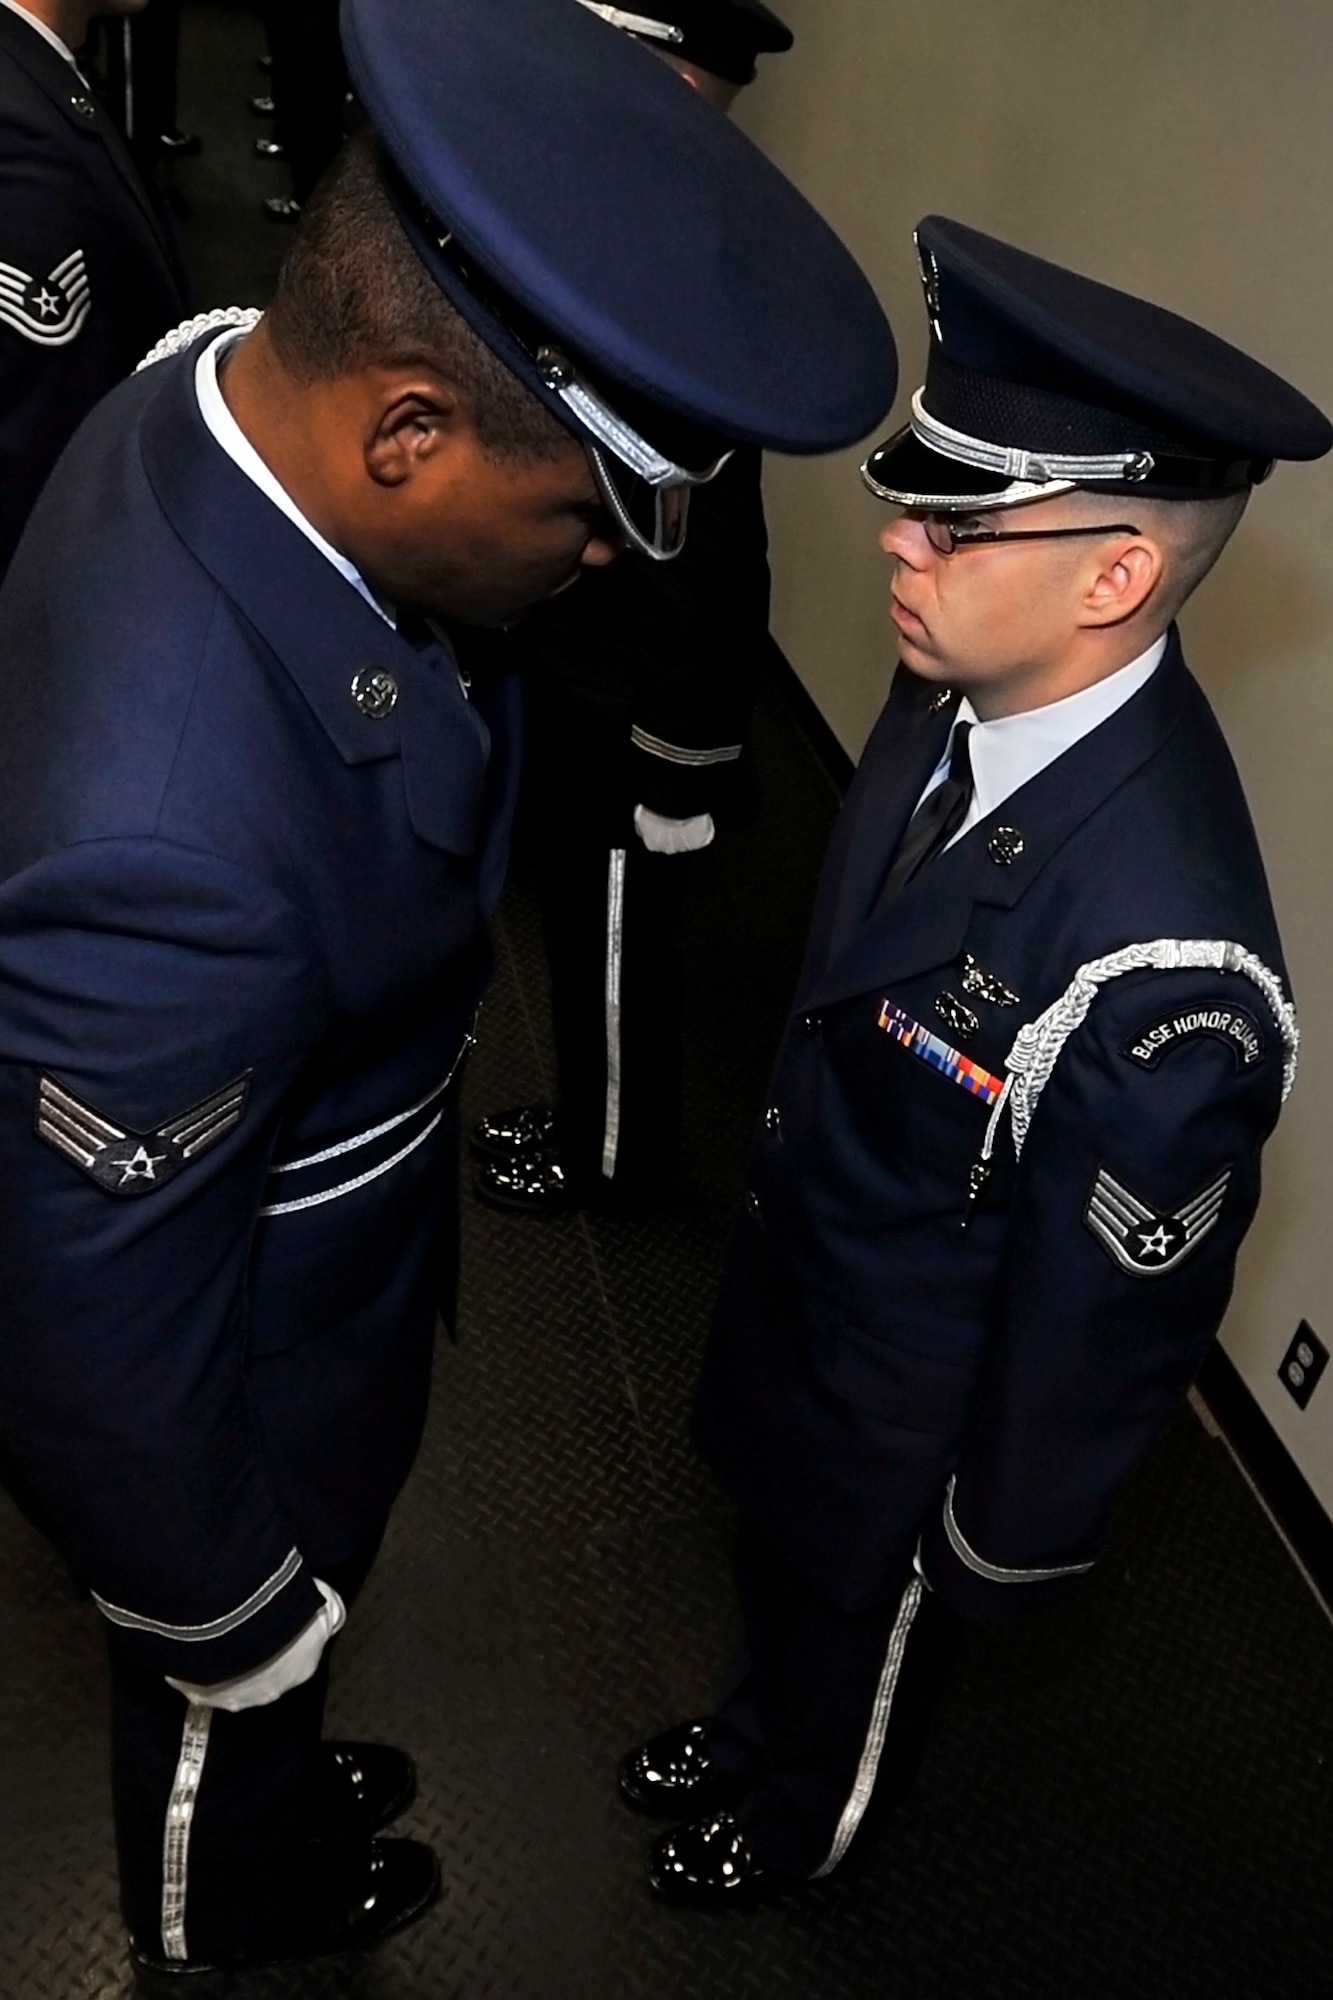 Senior Airman Lesley Toussaint (left), 88th Aerial Port Squadron, looks for uniform violoations during an open-ranks inspection. Toussaint, a reservist, is serving as trainer for the 87th Air Base Wing's active-duty honor guard. (U.S. Air Force photo by Shawn J. Jones)